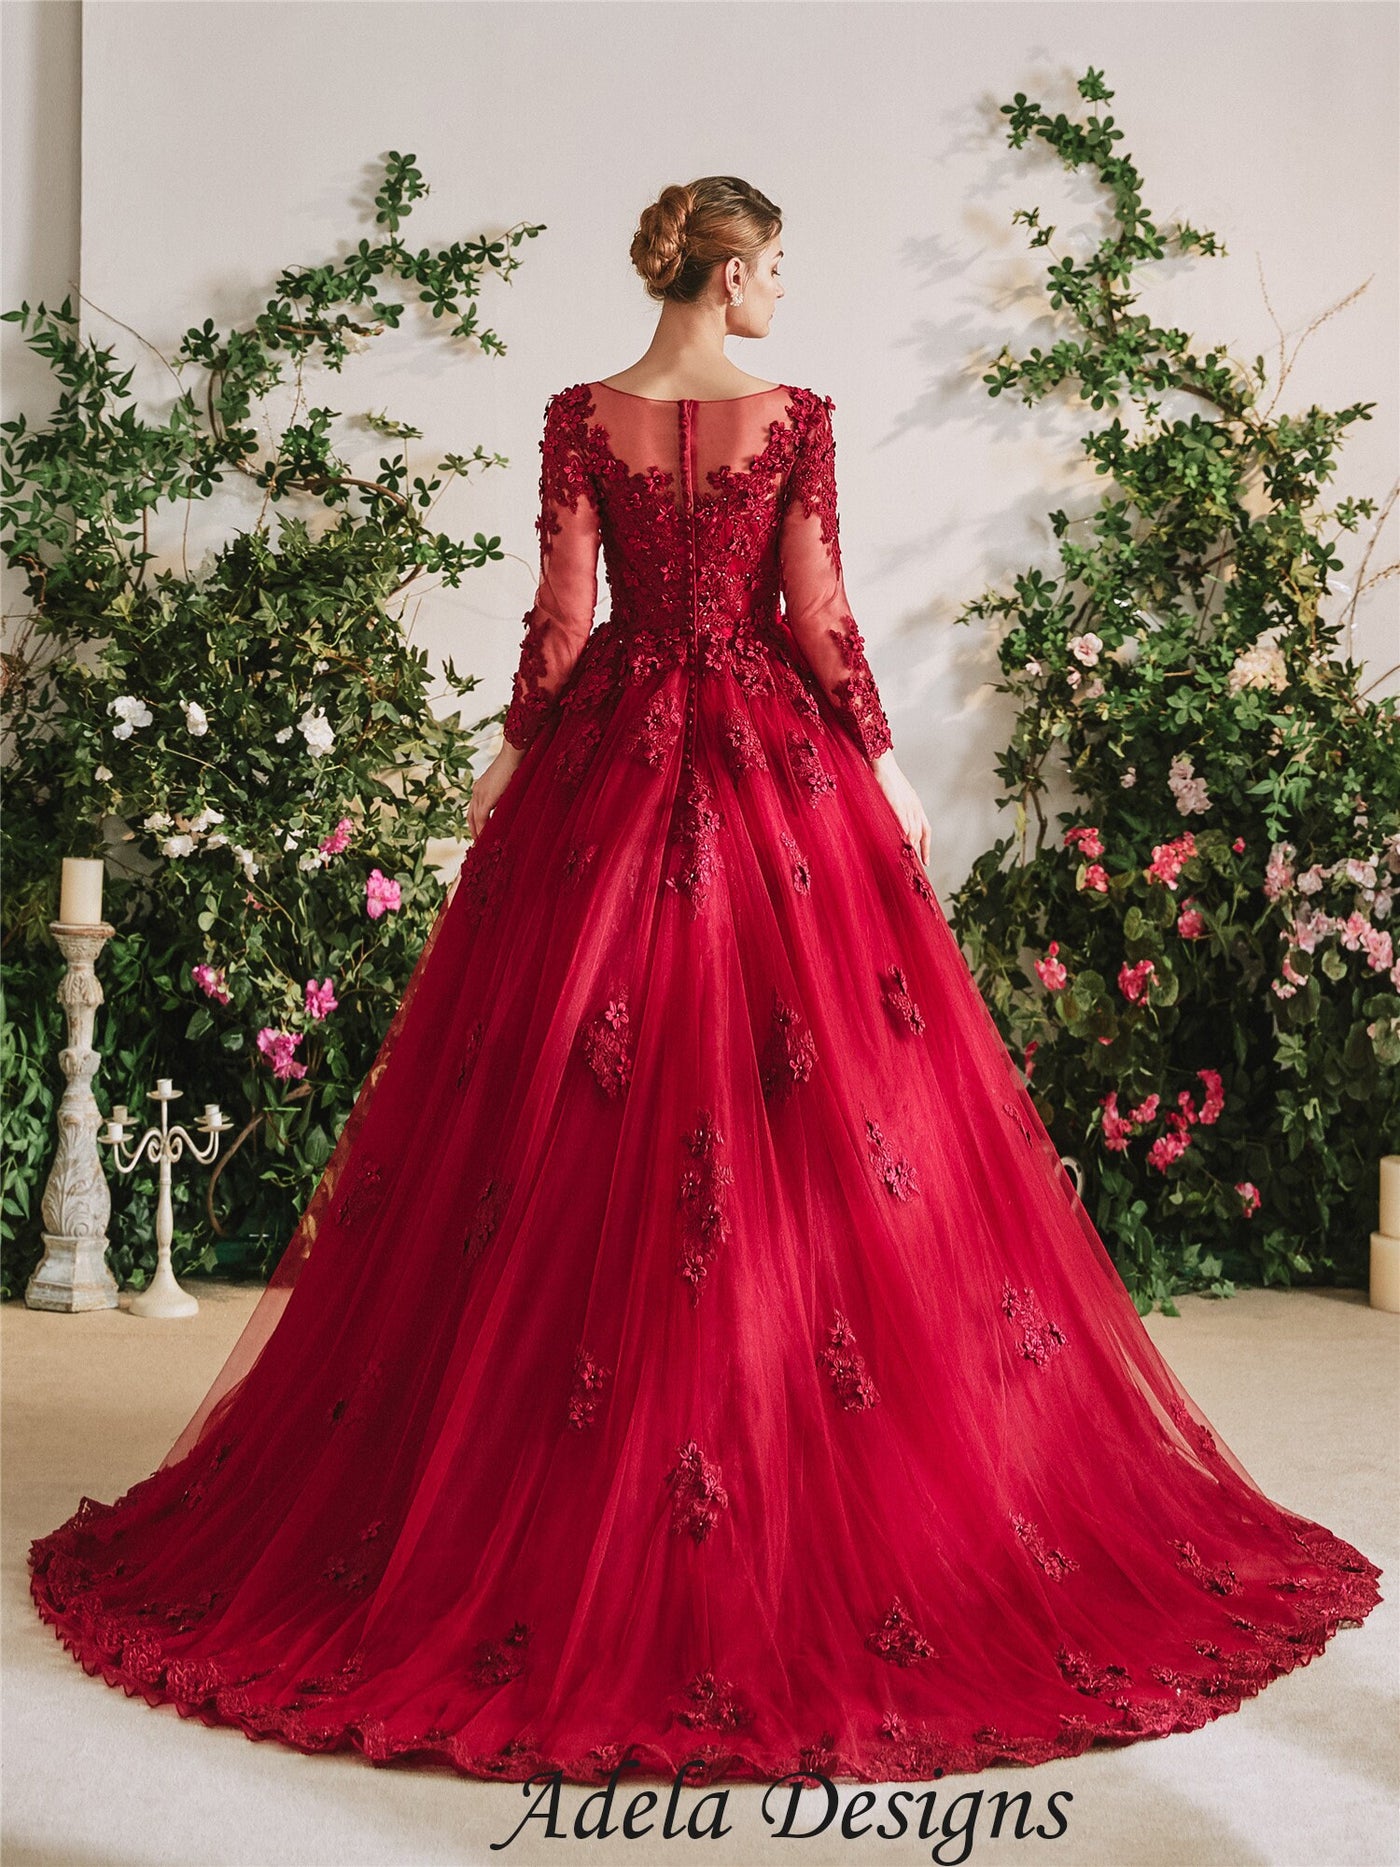 Elegant Red Prom Dresses Woman Dance Ball Gowns Long Sleeve Mermaid Feather  Evening Formal Party Clothing